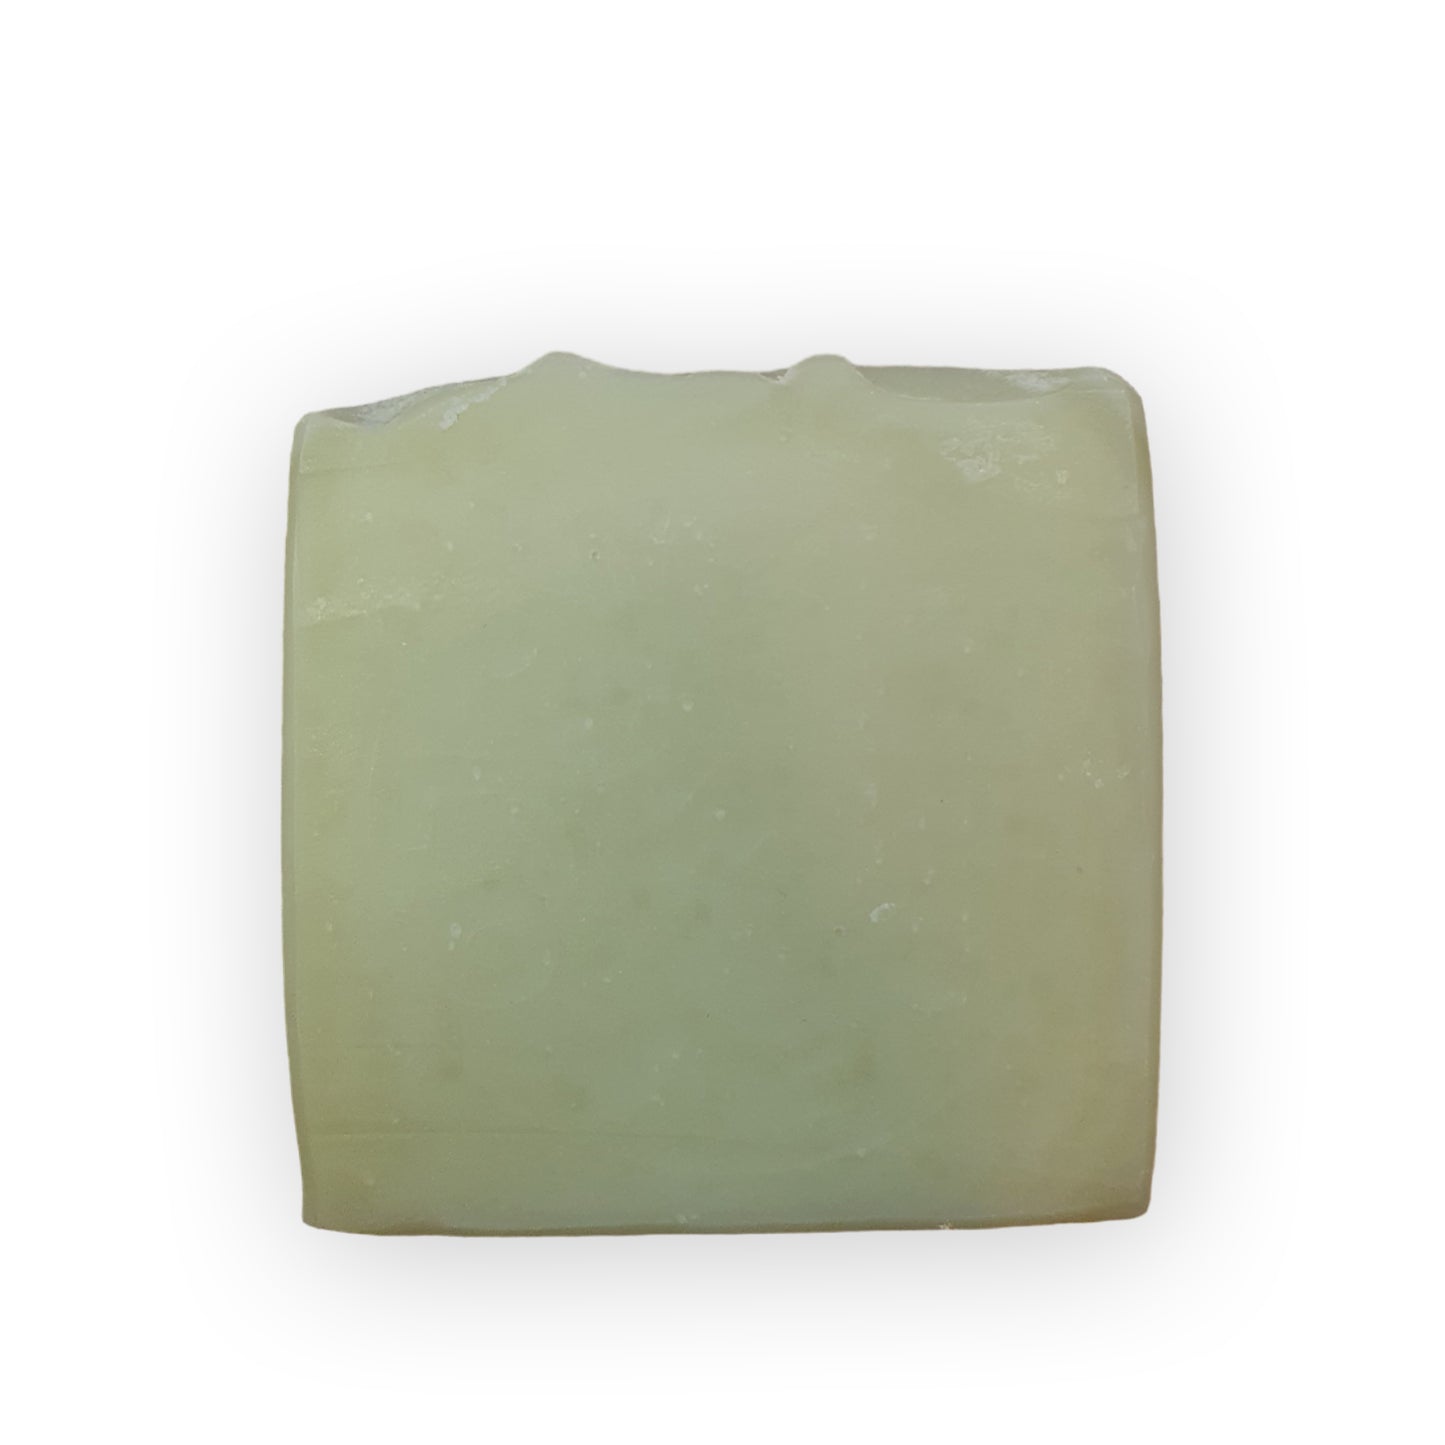 100% Natural Handmade Soap - Lime & Patchouli